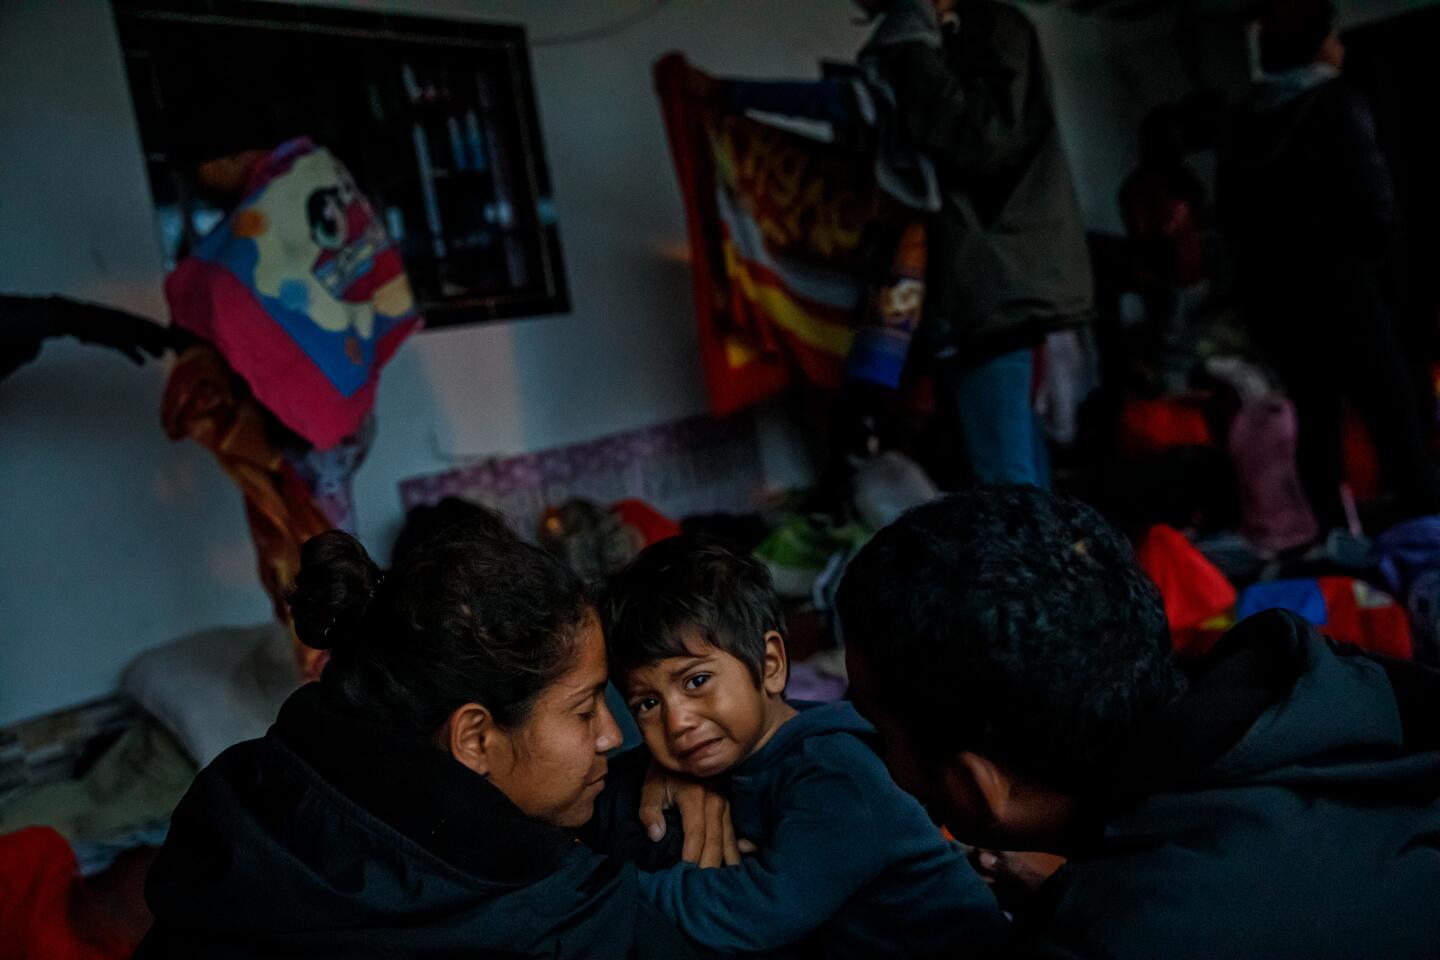 Rudimar Alvarez, 19, comforts son Jhorman Perez, 1, as her husband, Johan Perez, 25, looks on after spending a cold night sleeping outside a storefront in La Laguna, Colombia.